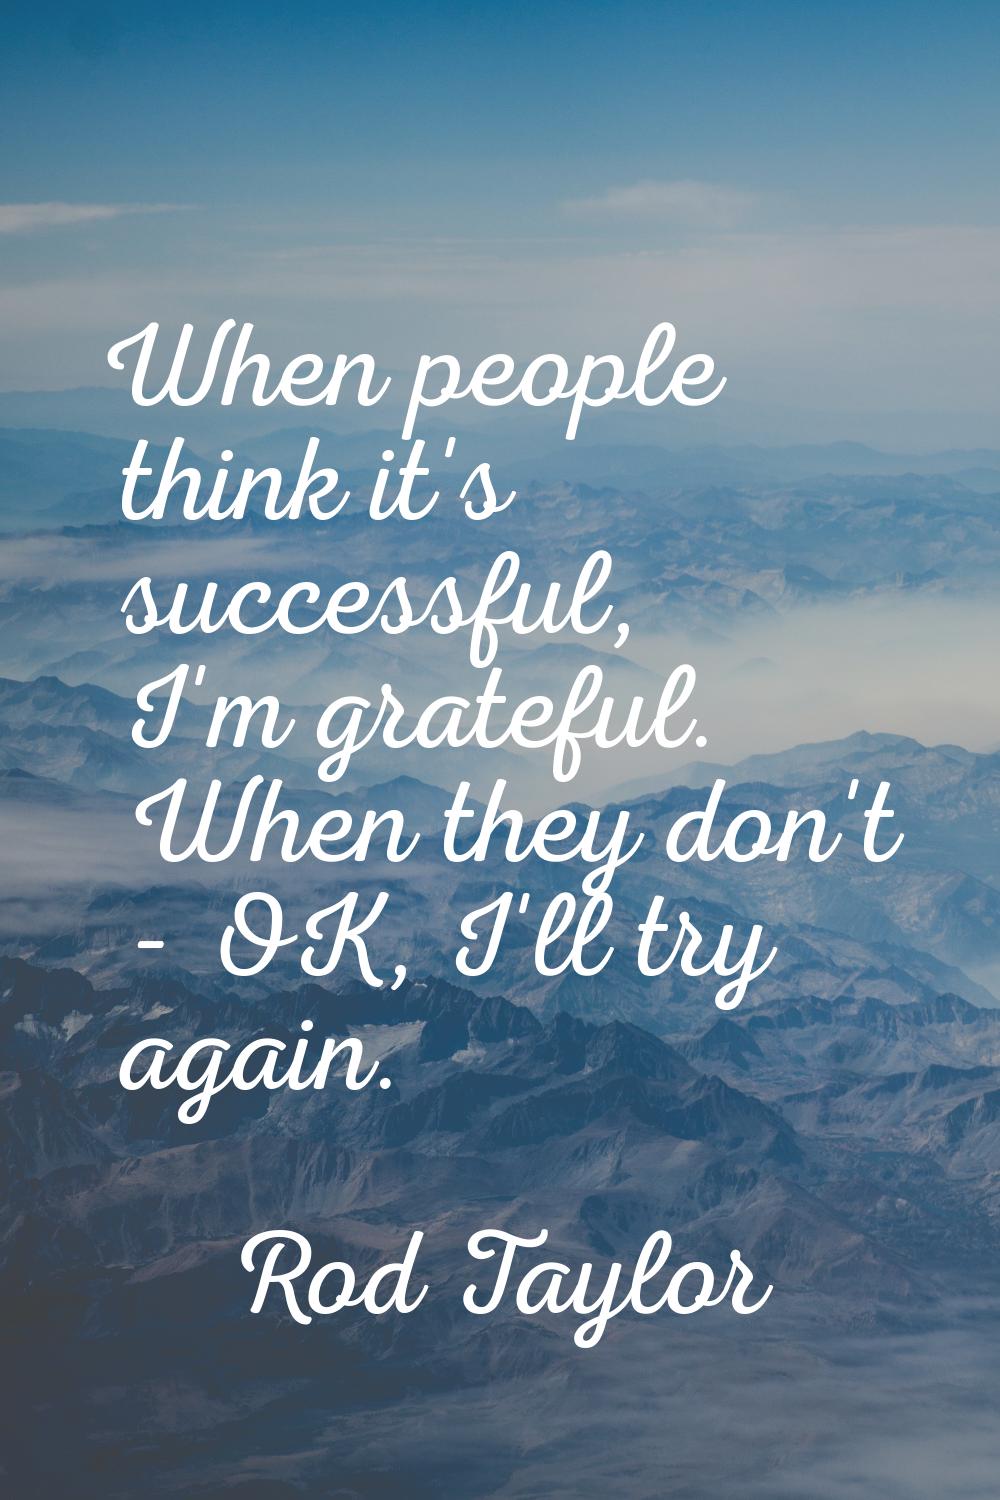 When people think it's successful, I'm grateful. When they don't - OK, I'll try again.